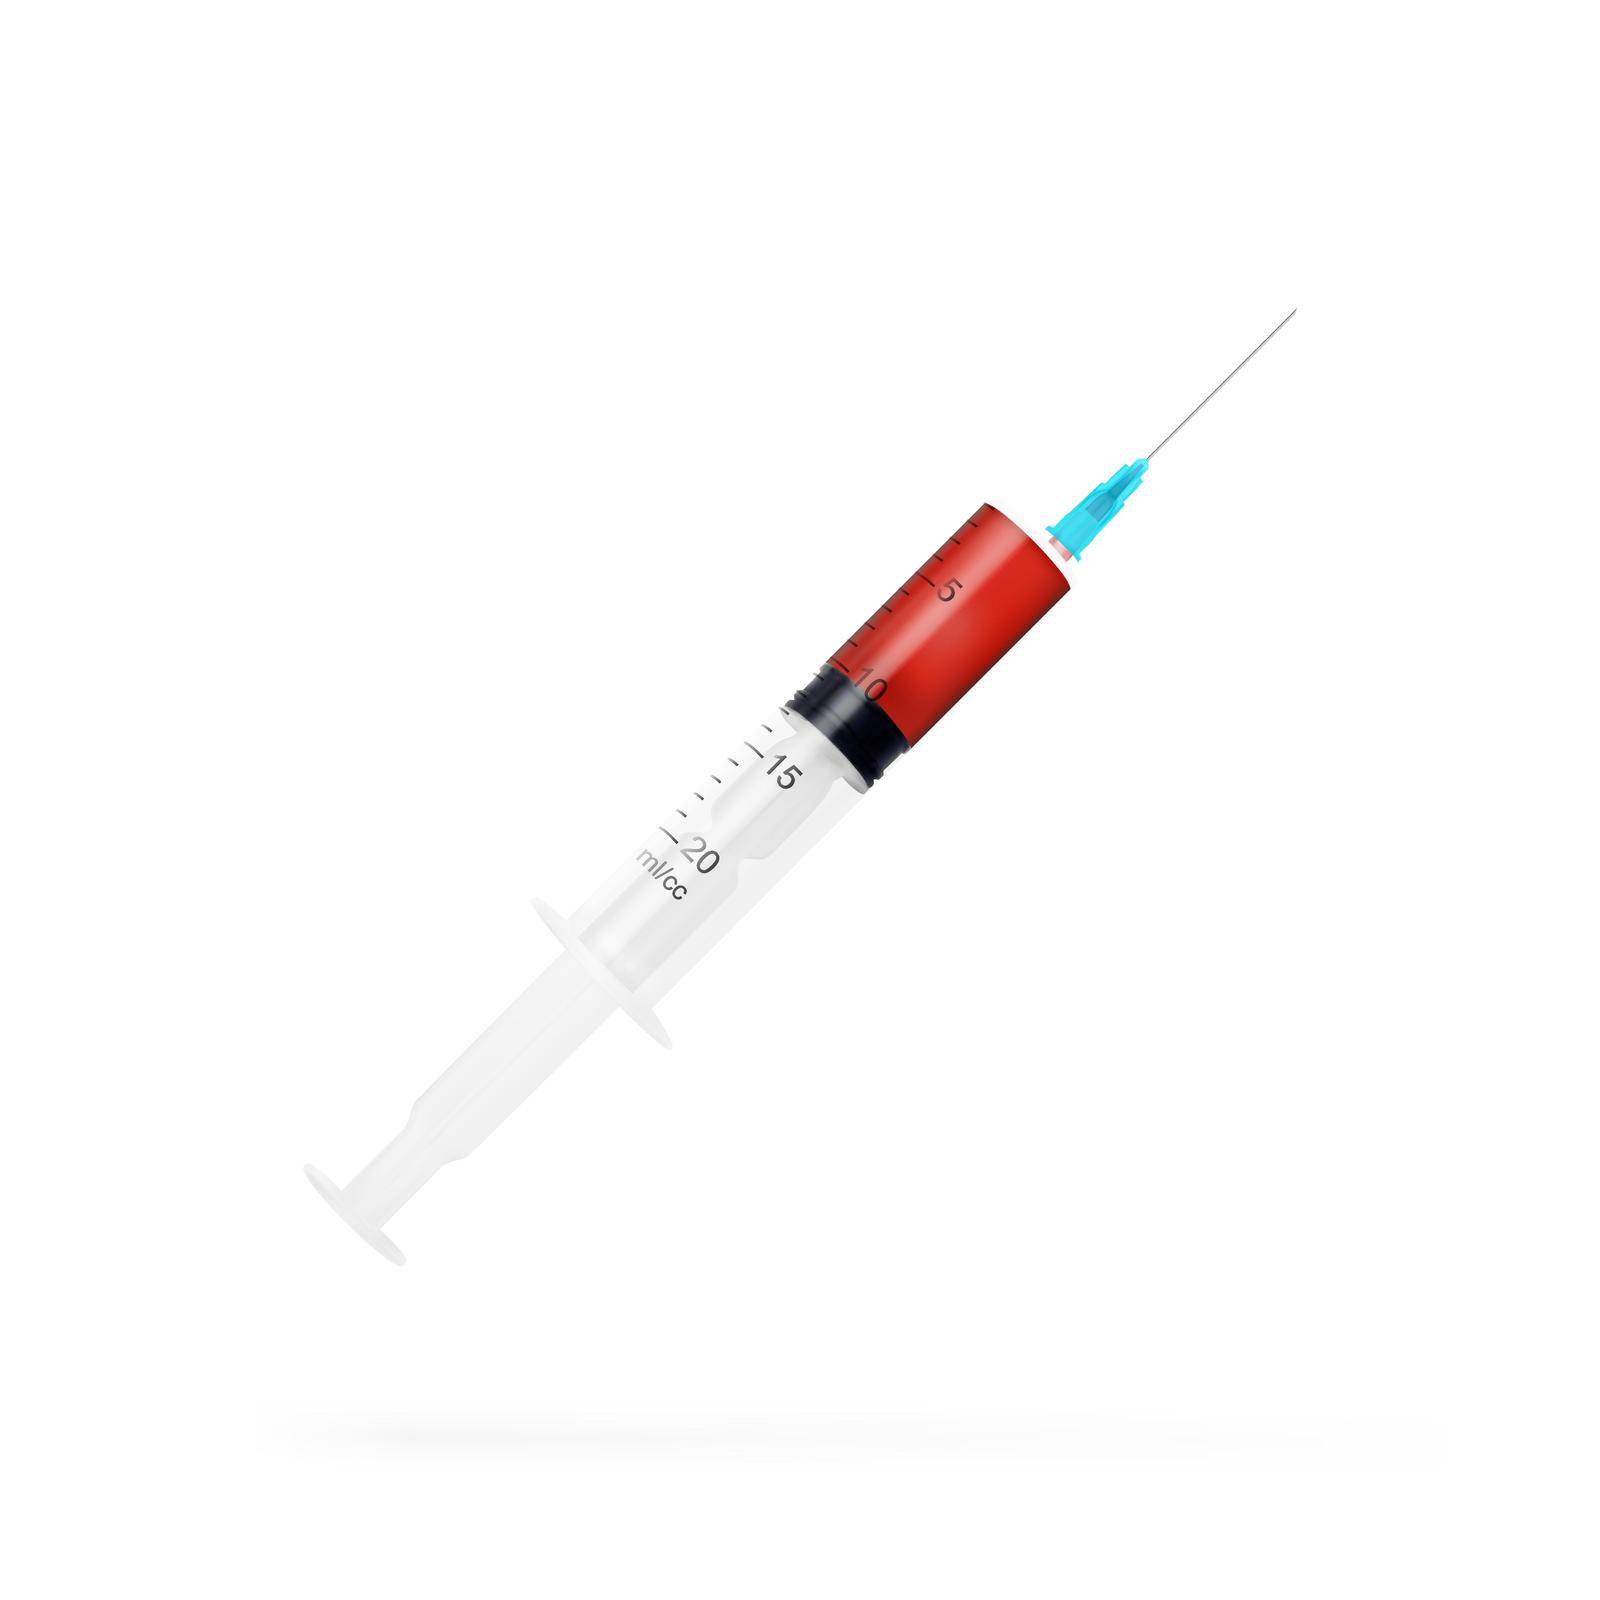 Realistic Syringe With Blood Isolated On White Background. EPS10 Vector